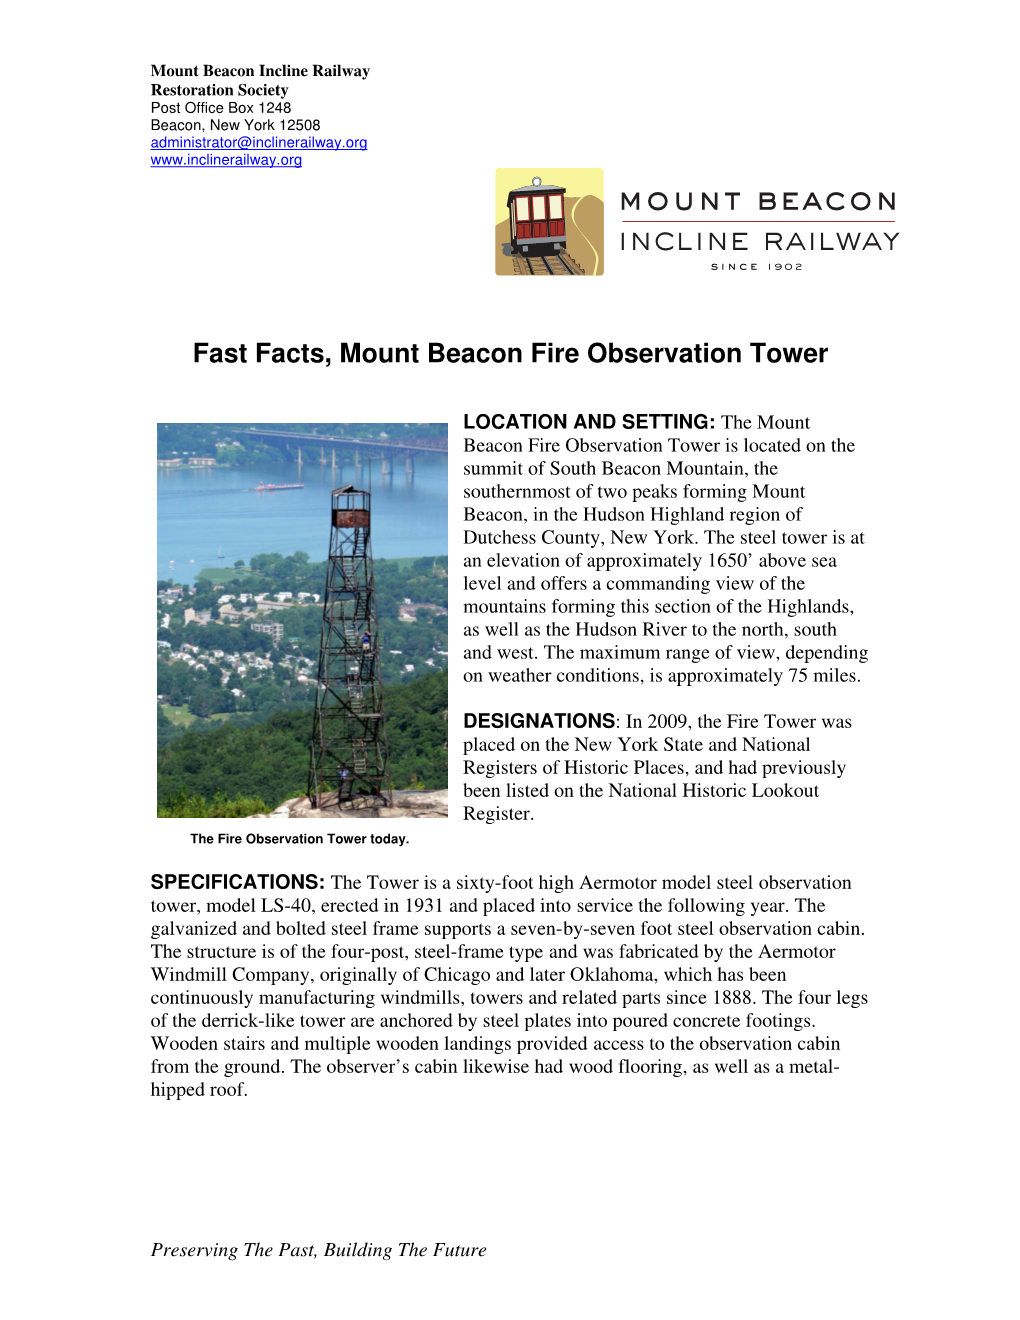 Fast Facts, Mount Beacon Fire Observation Tower